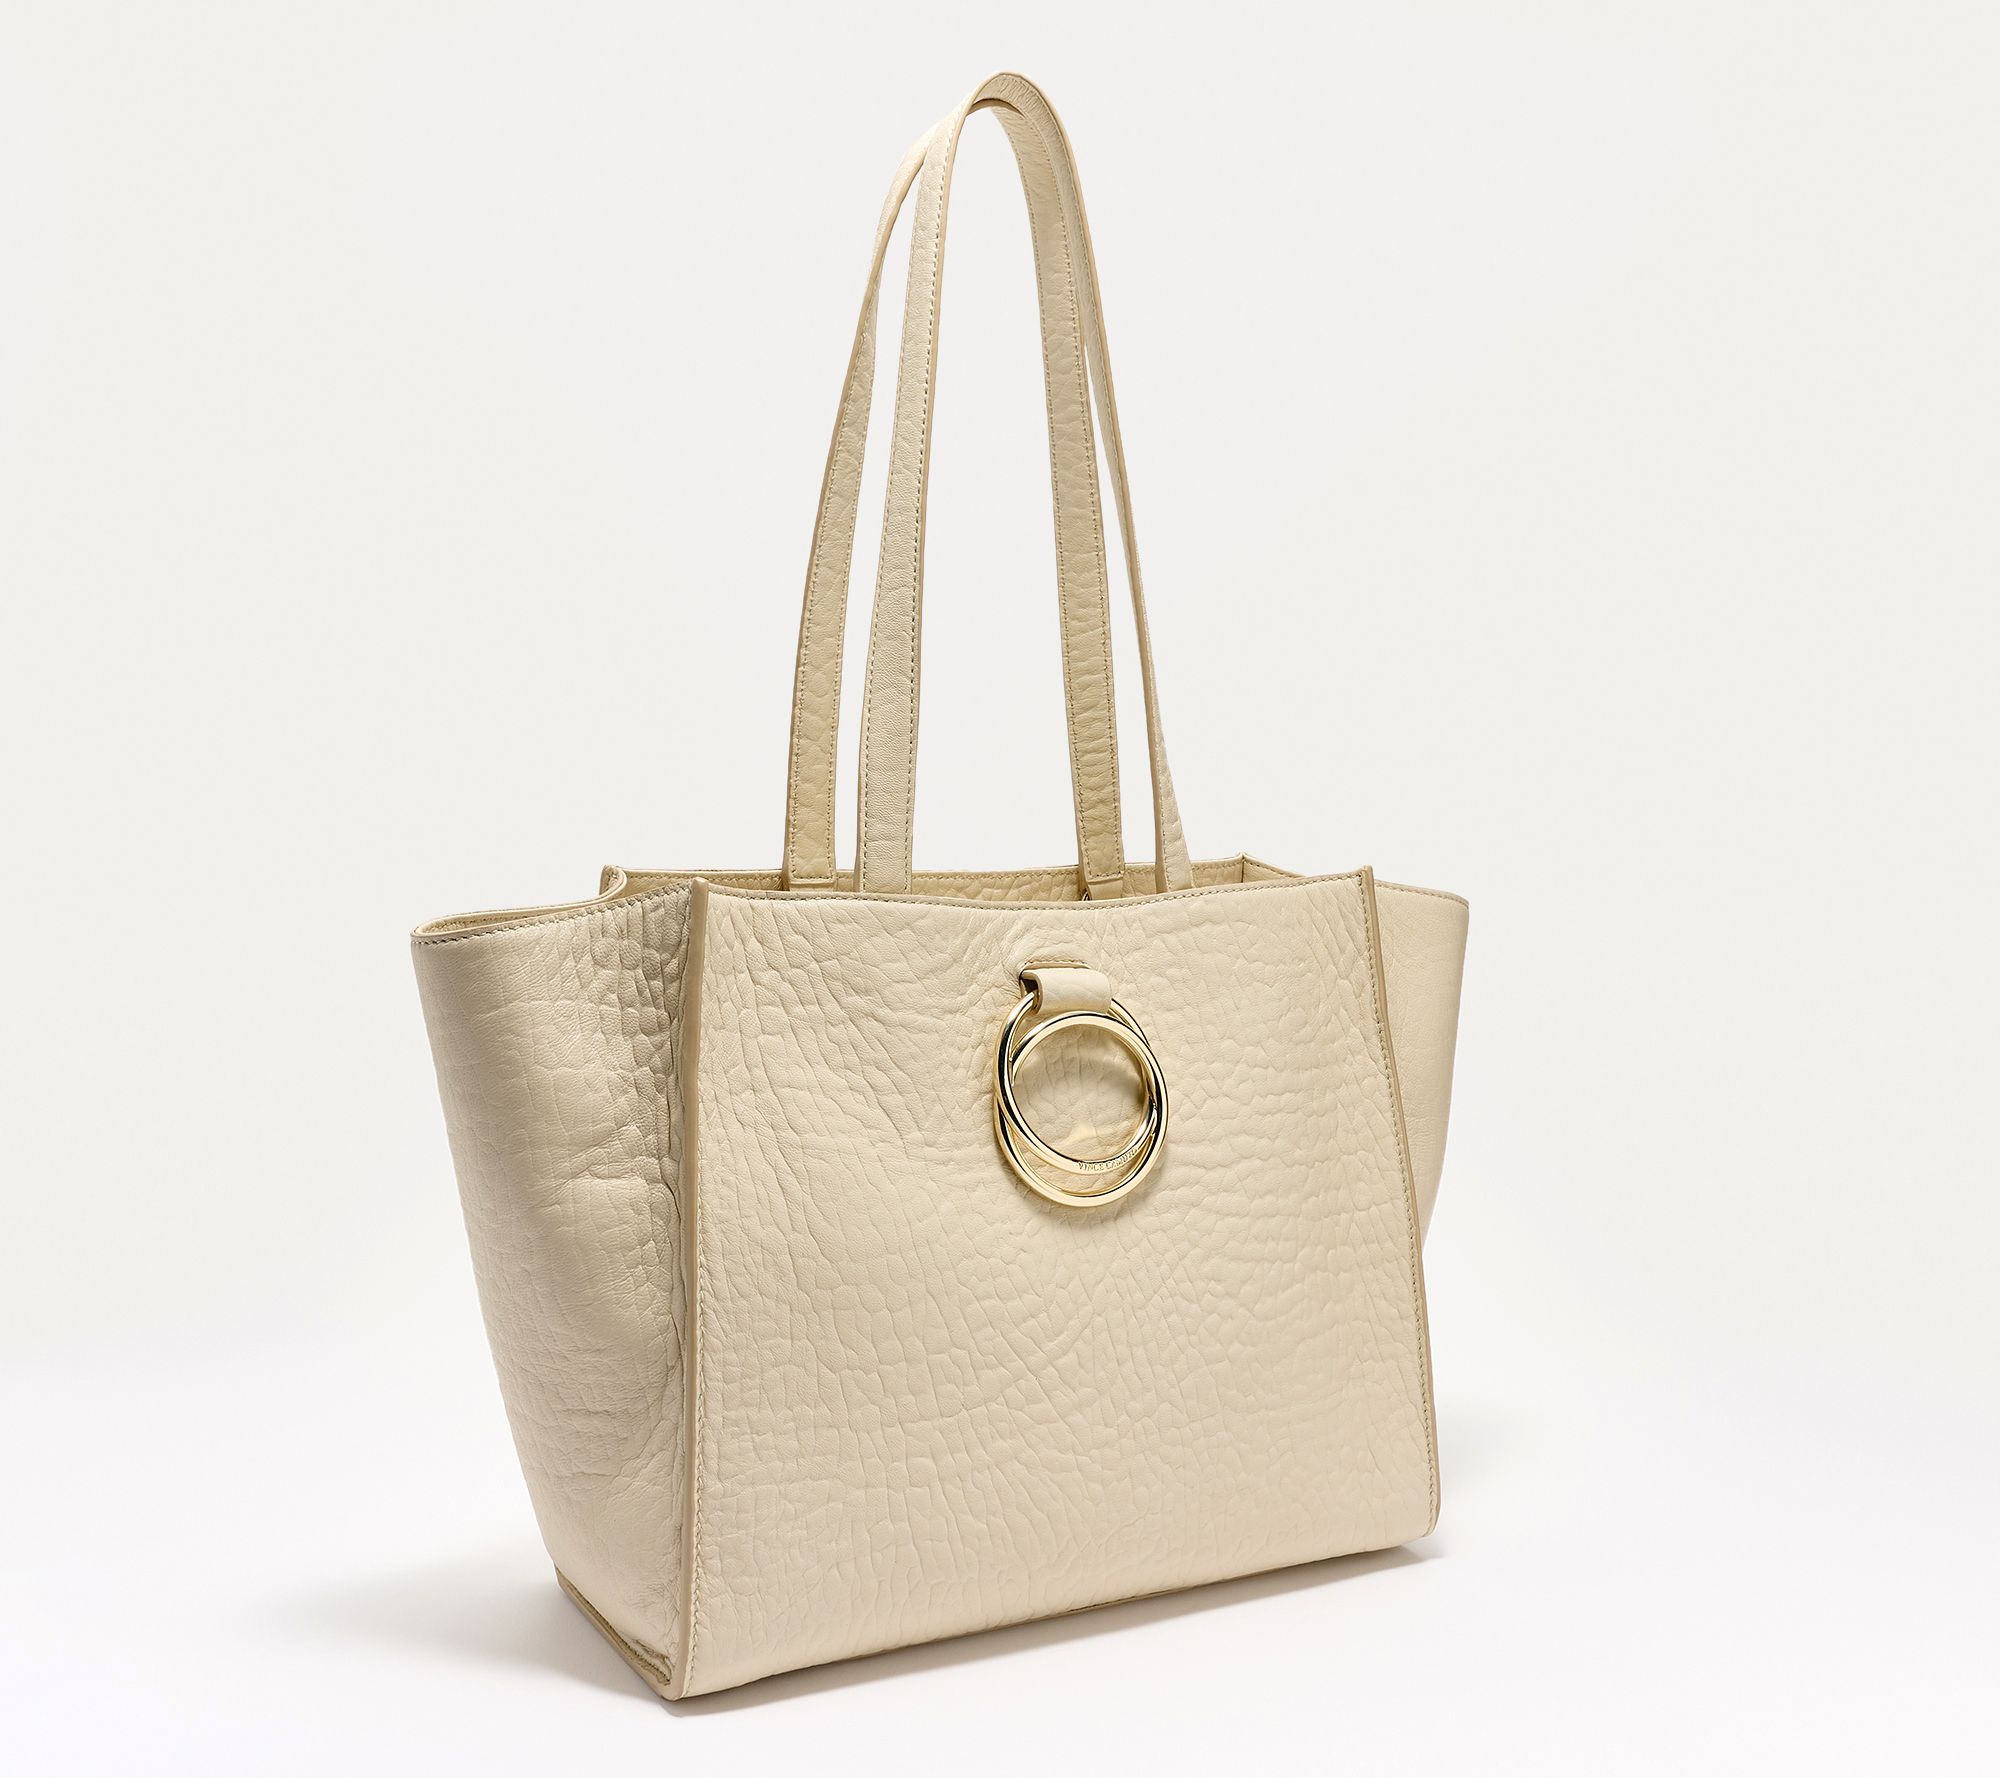 Kate Spade 24-Hour Flash Deal: Get a $300 Packable Tote Bag for $69